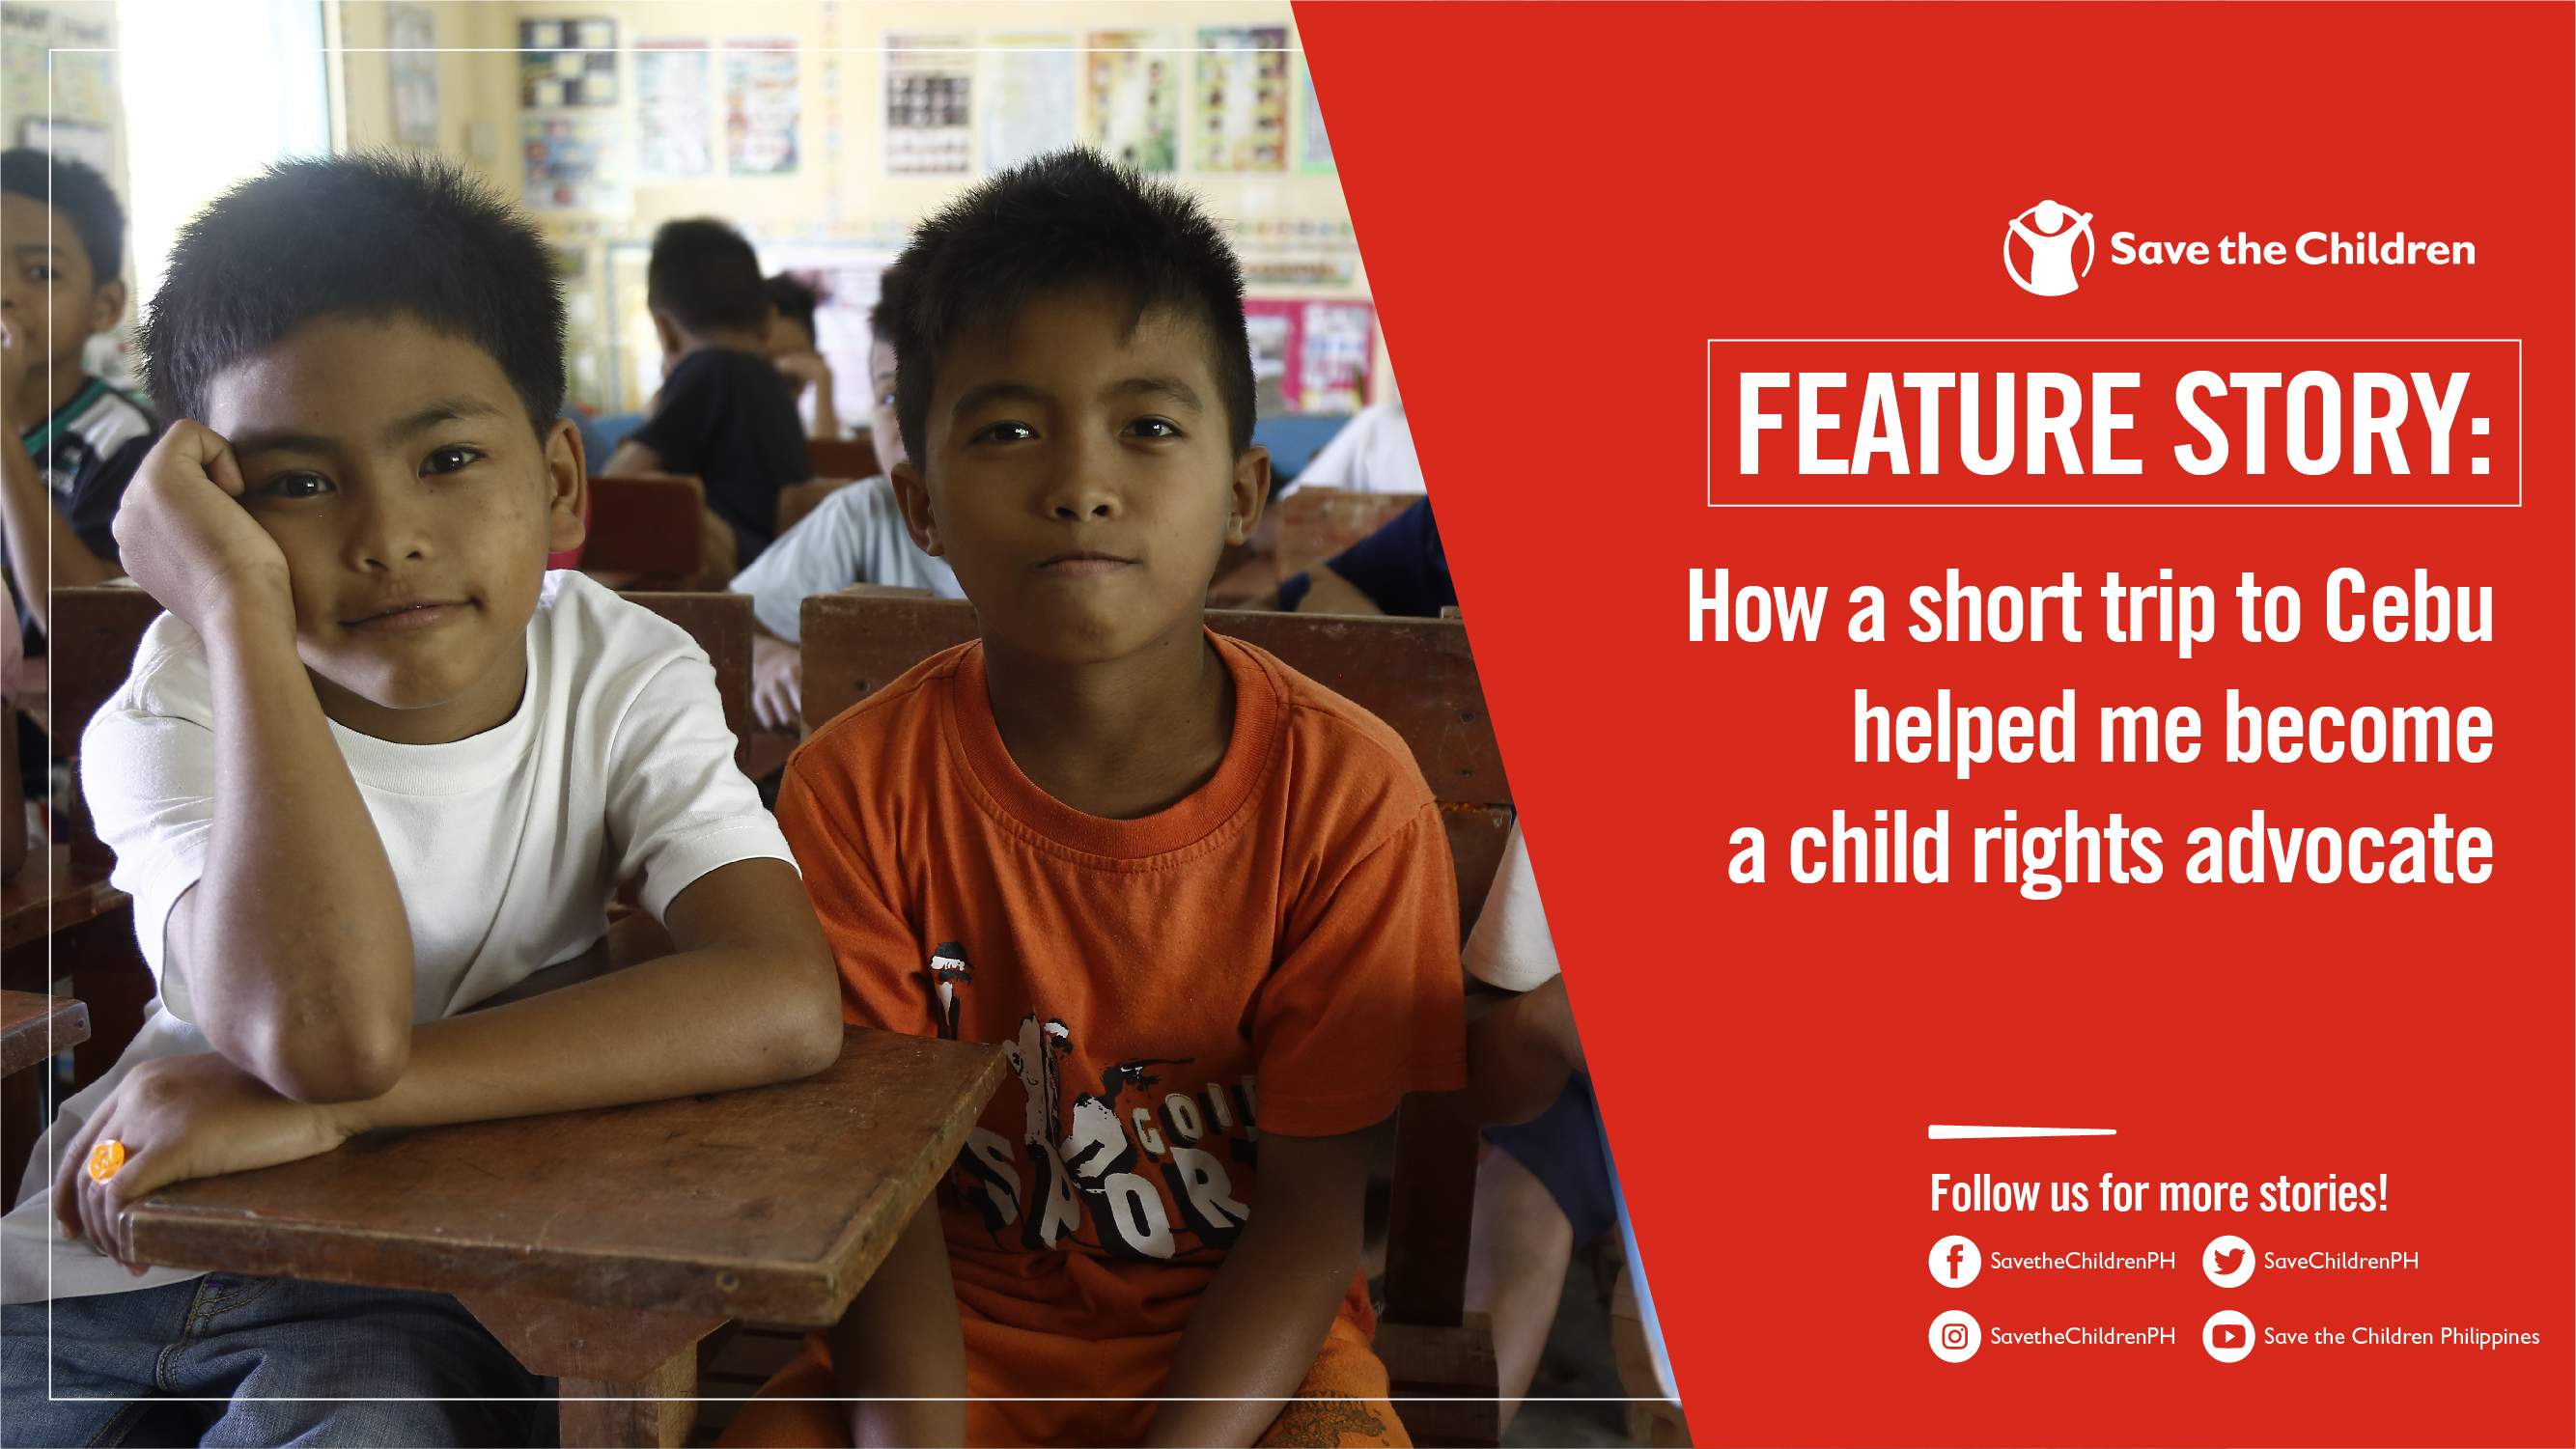 How a short trip to Cebu helped me become a child rights advocate